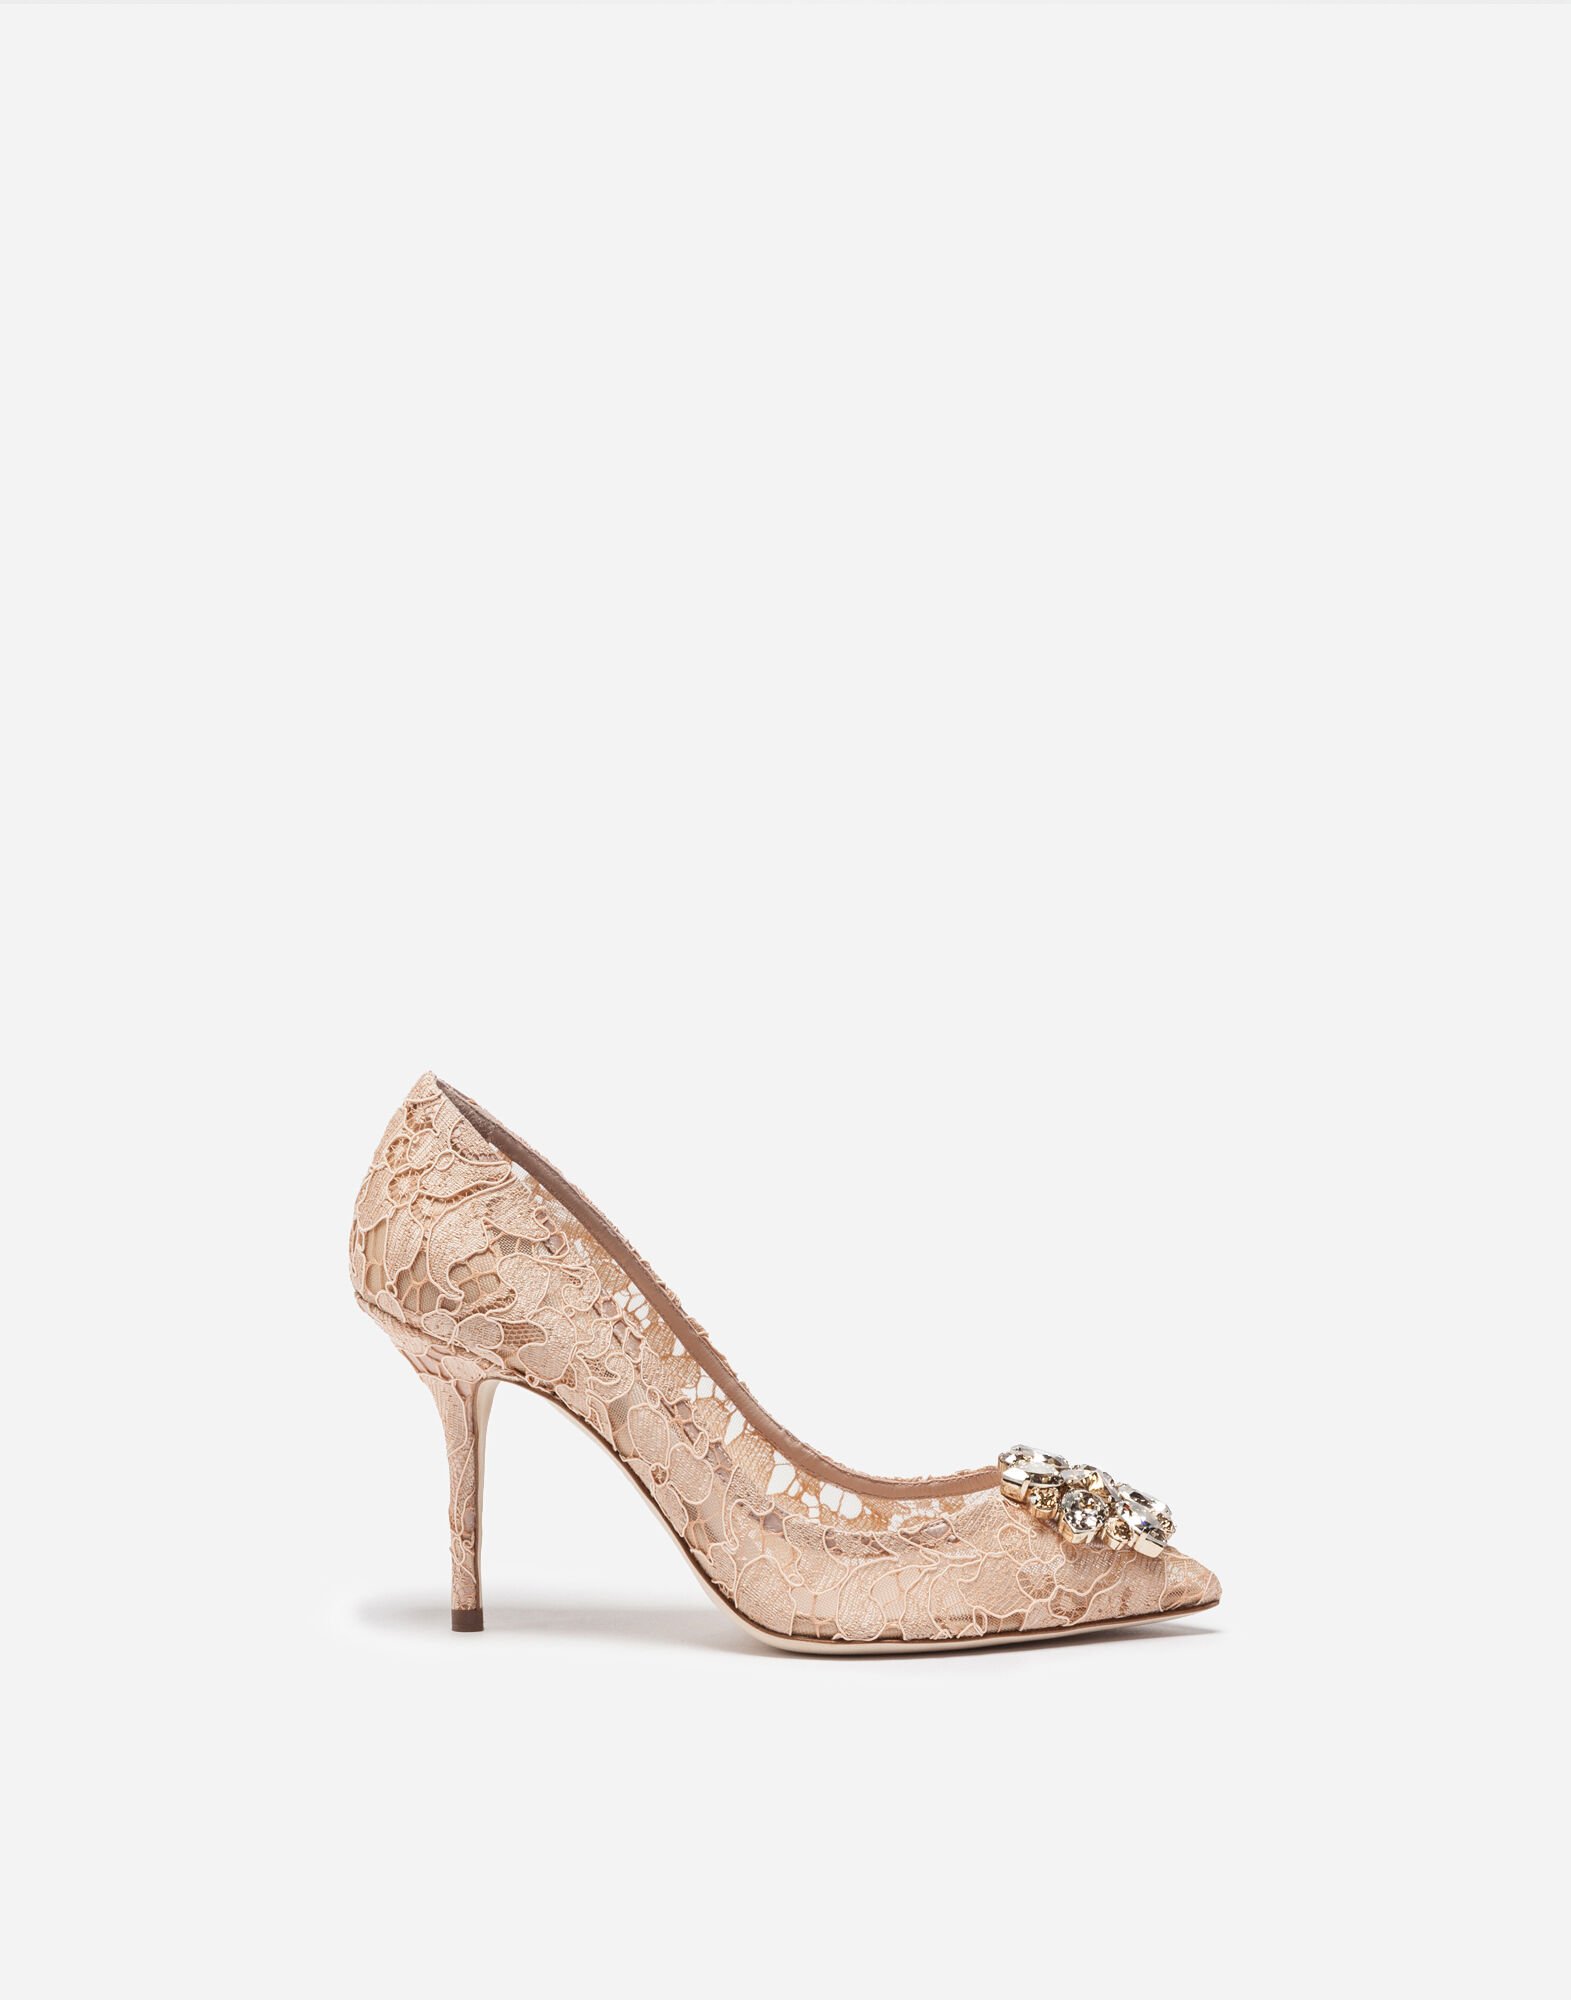 ${brand} Lace rainbow pumps with brooch detailing ${colorDescription} ${masterID}